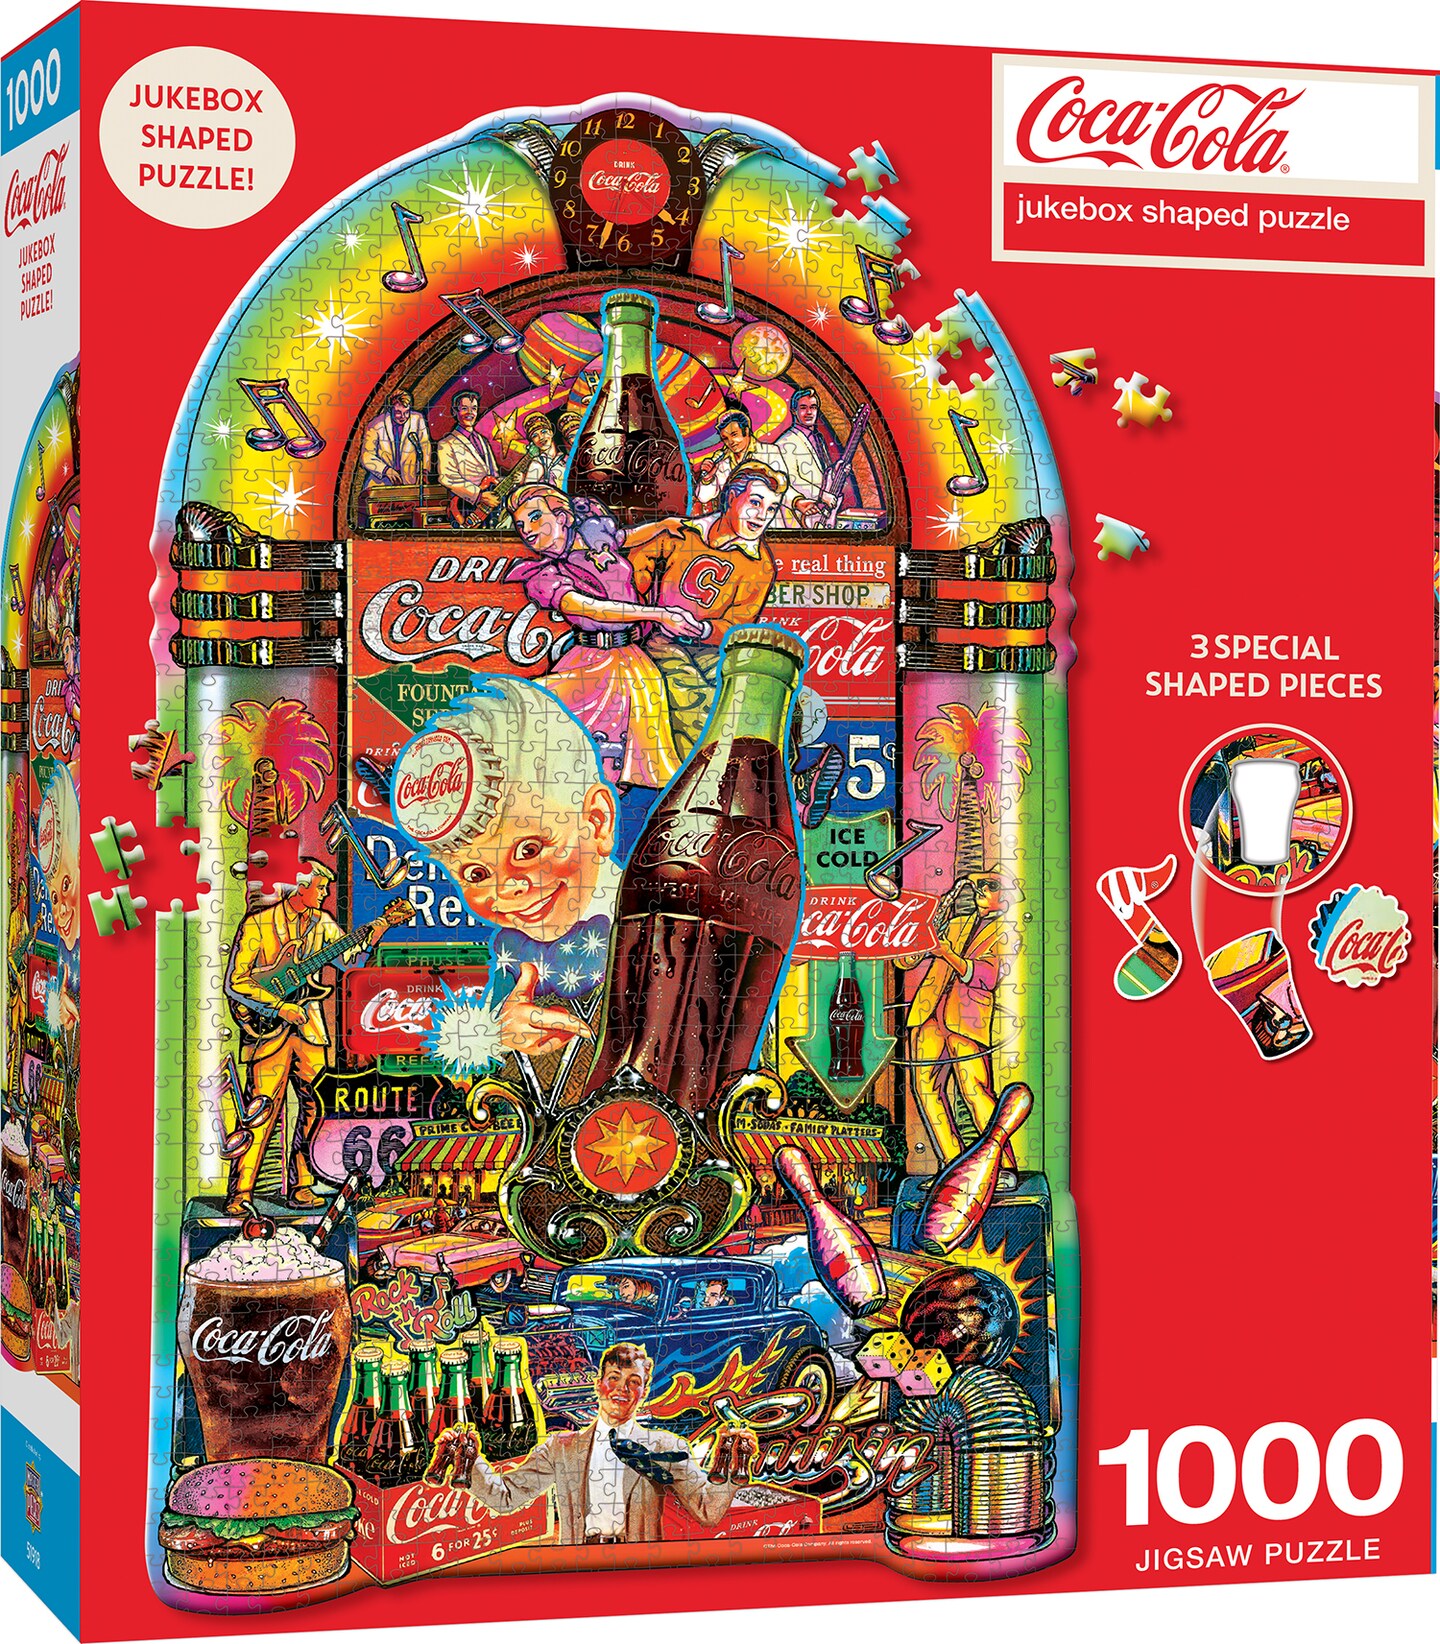 Masterpieces 1000 Piece Jigsaw Puzzle For Adults and Families - Coca-Cola  Jukebox - 20.72x 34.6